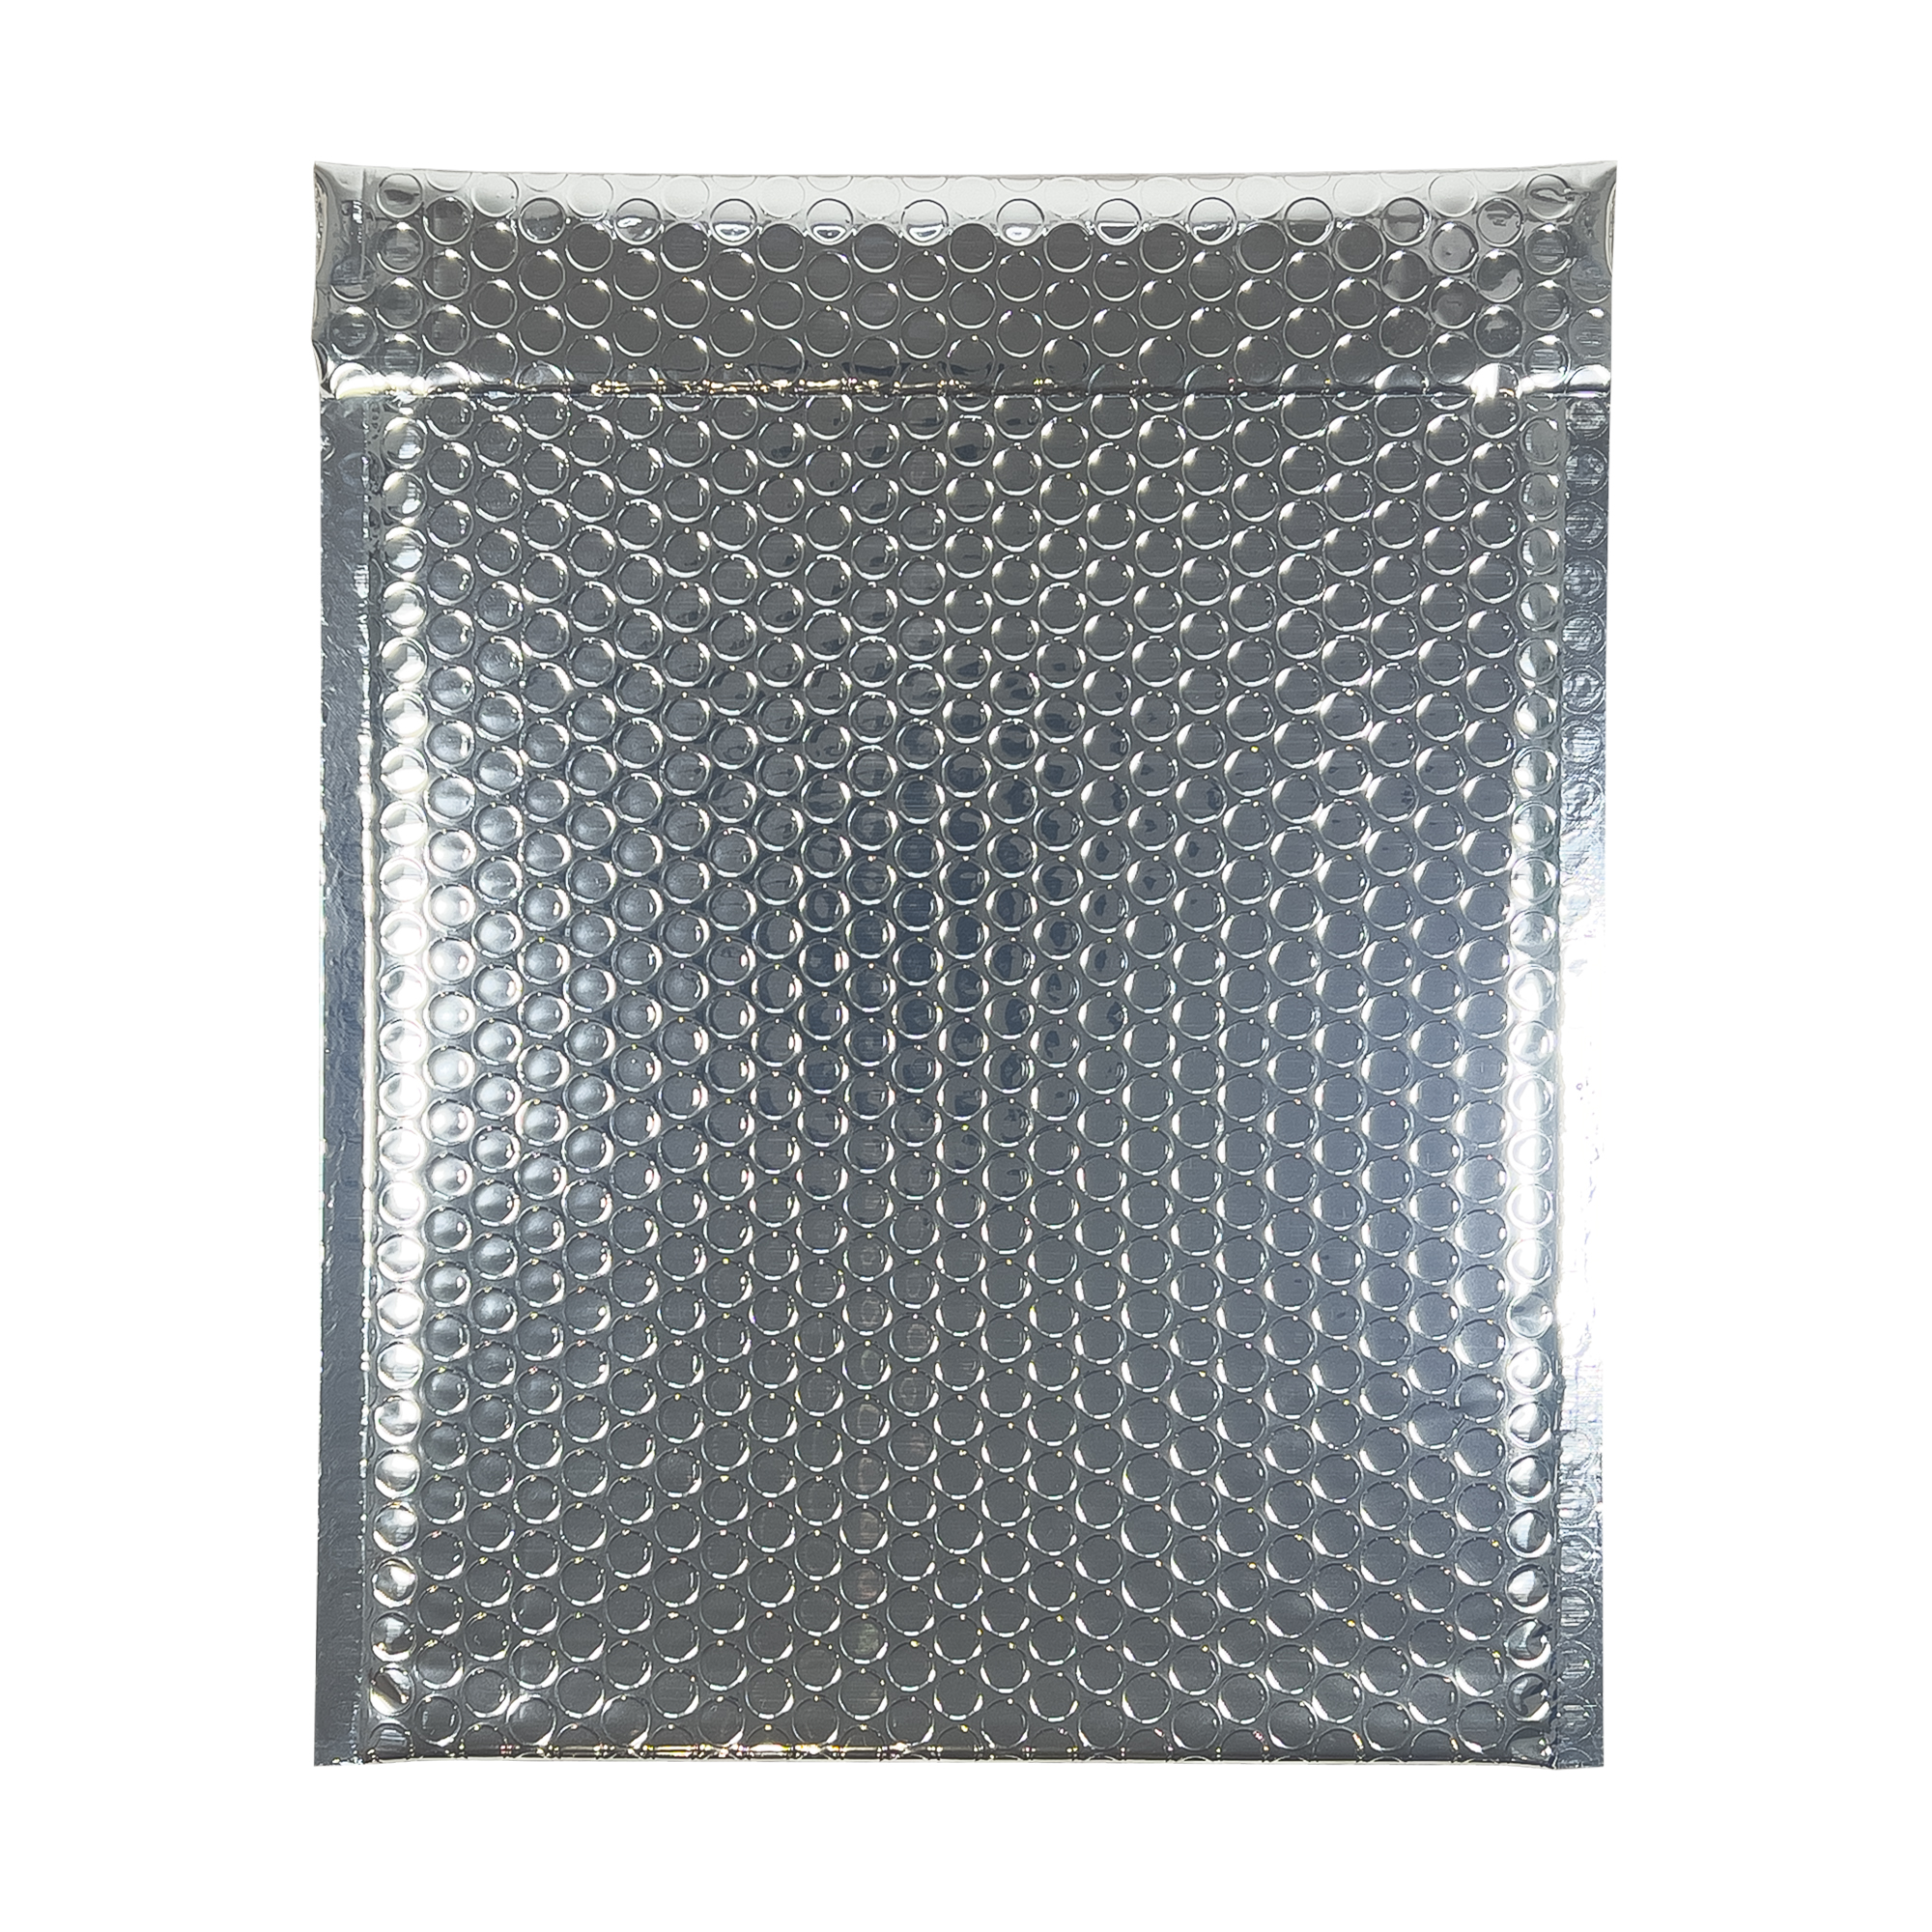 sterling-silver-bubble-padded-envelopes-rectangle-flap-closed